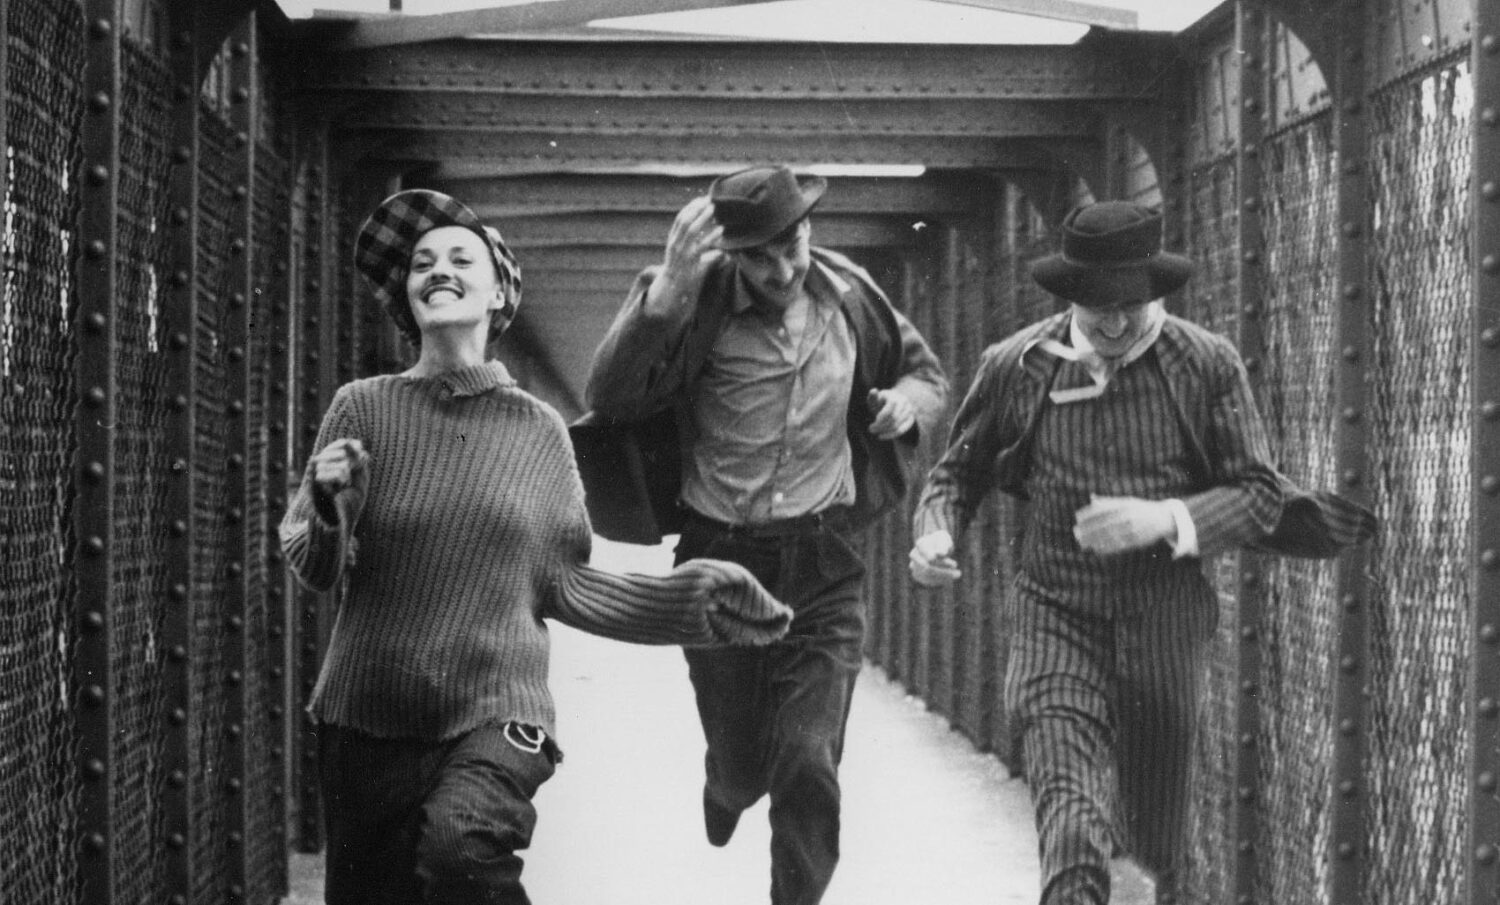 jules and jim featured